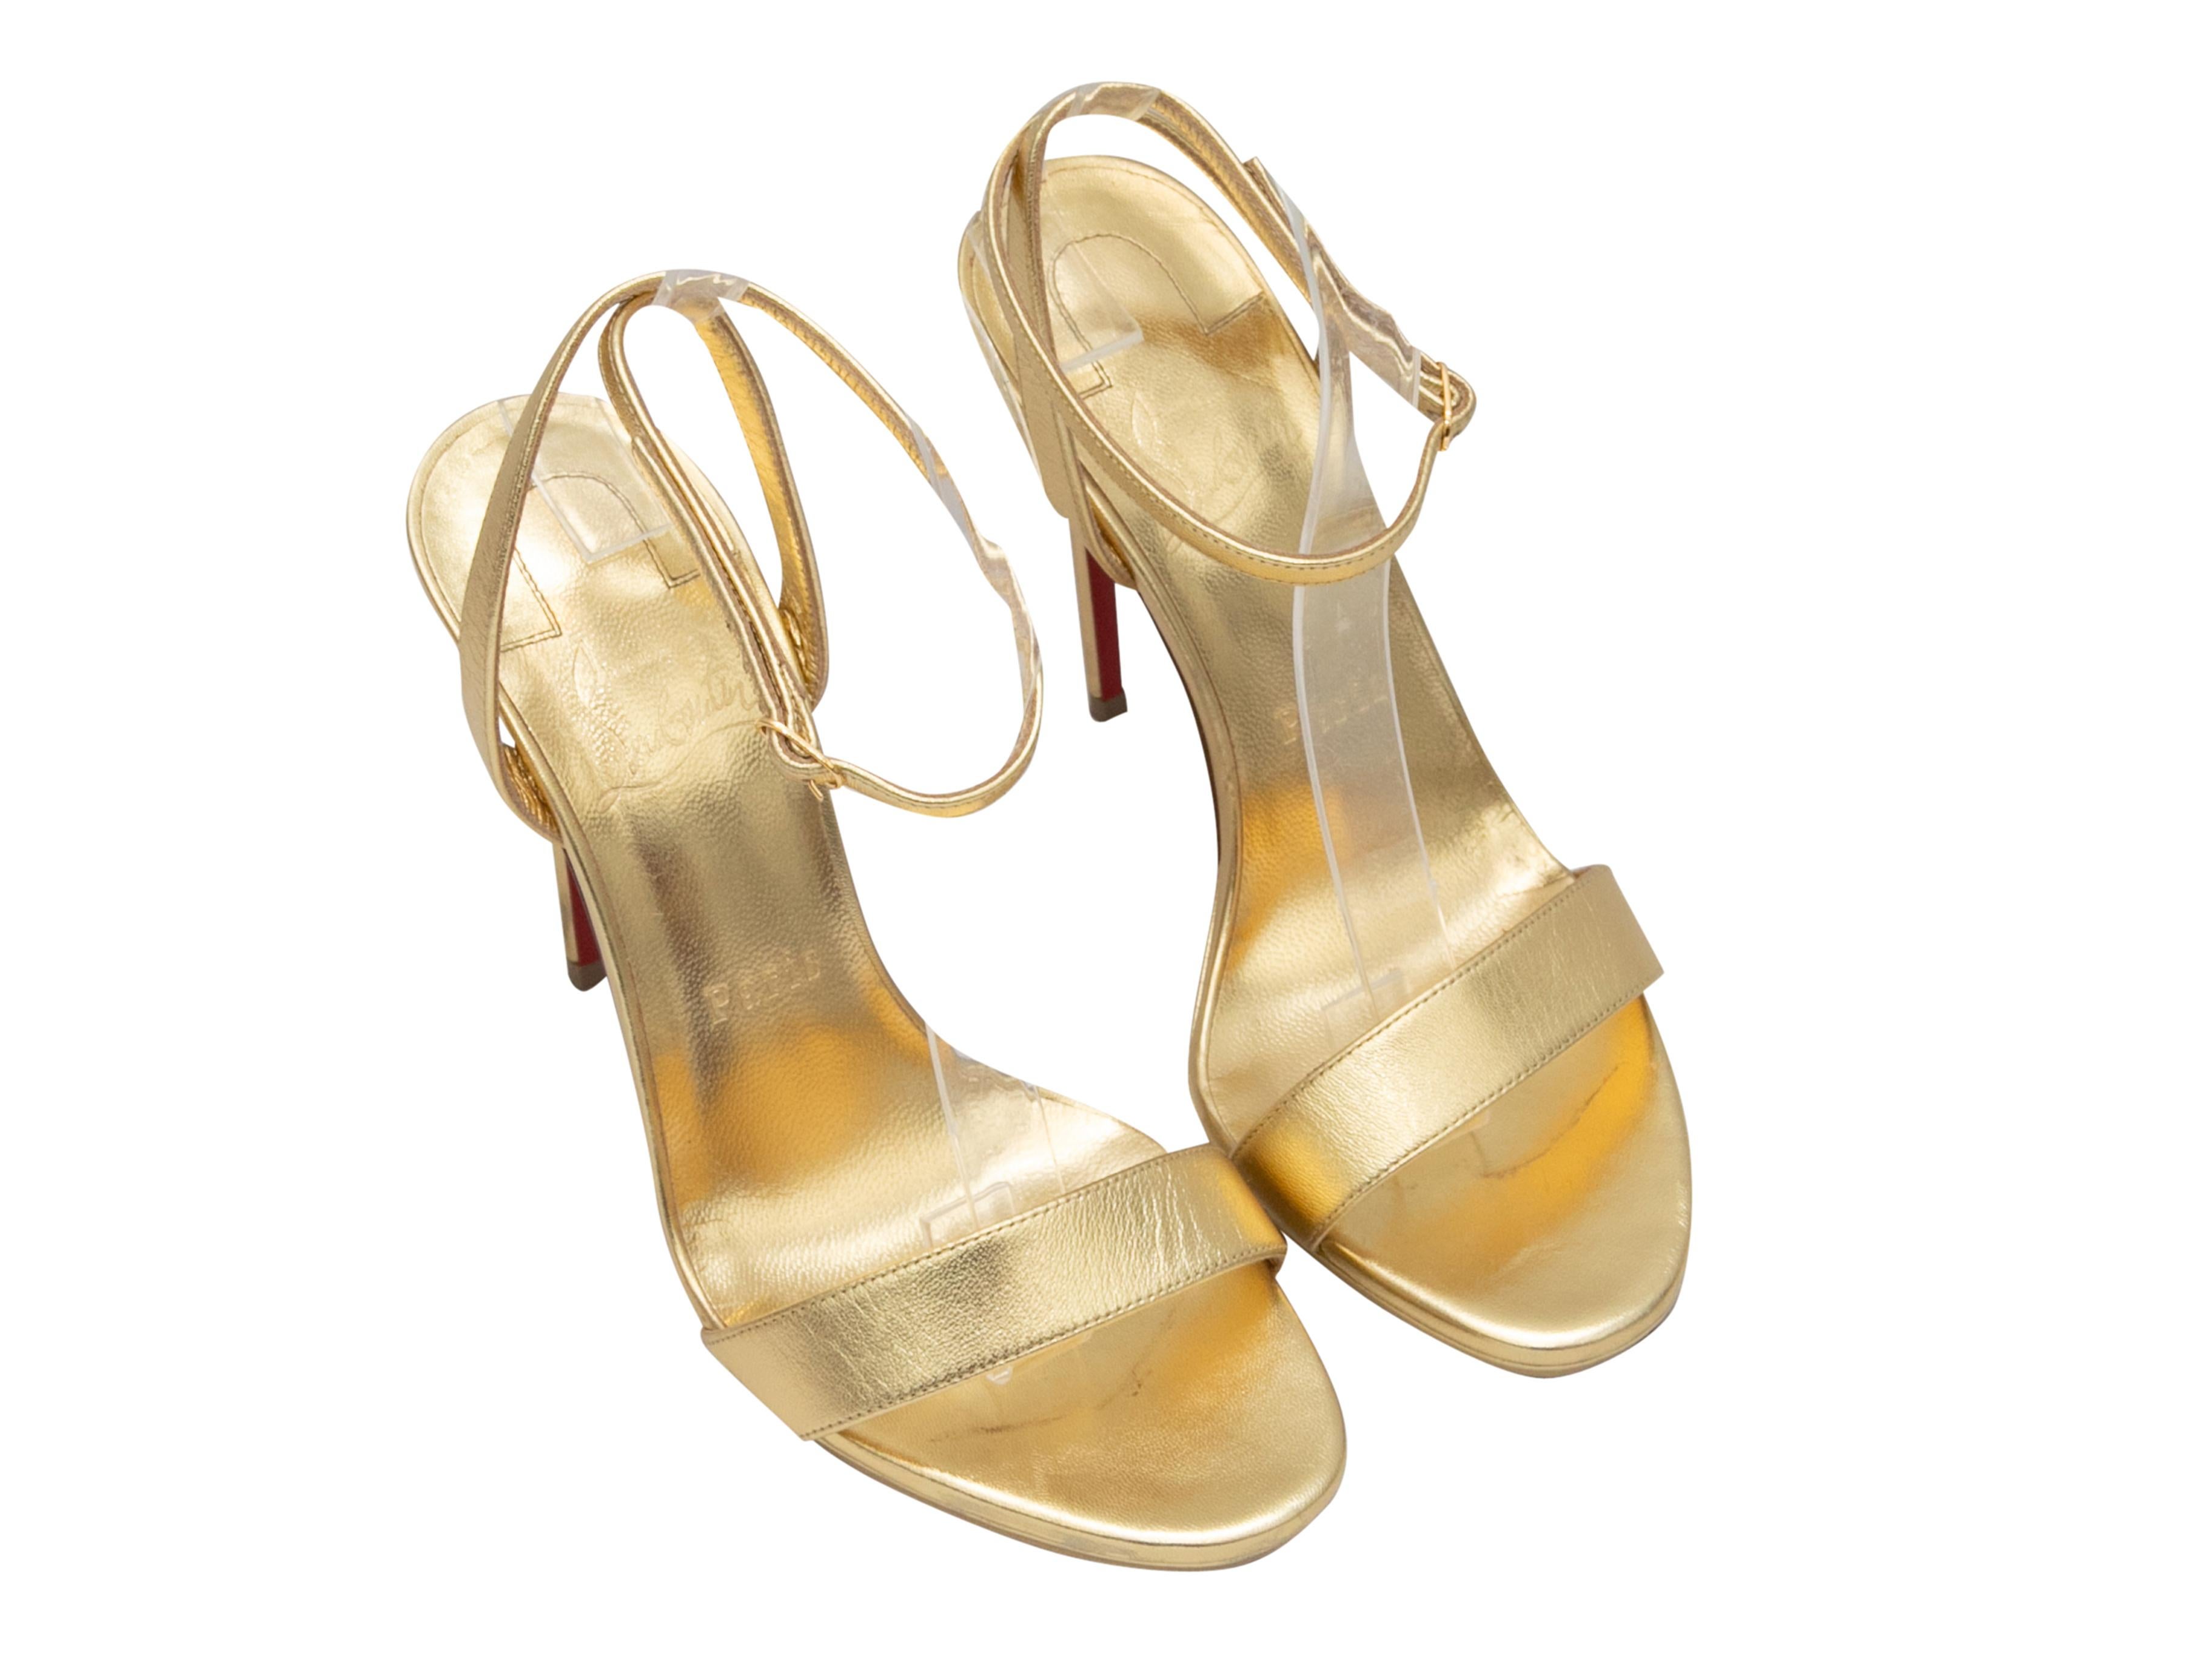 Gold metallic leather heeled sandals by Christian Louboutin. Buckle closures at ankle straps. 4.5